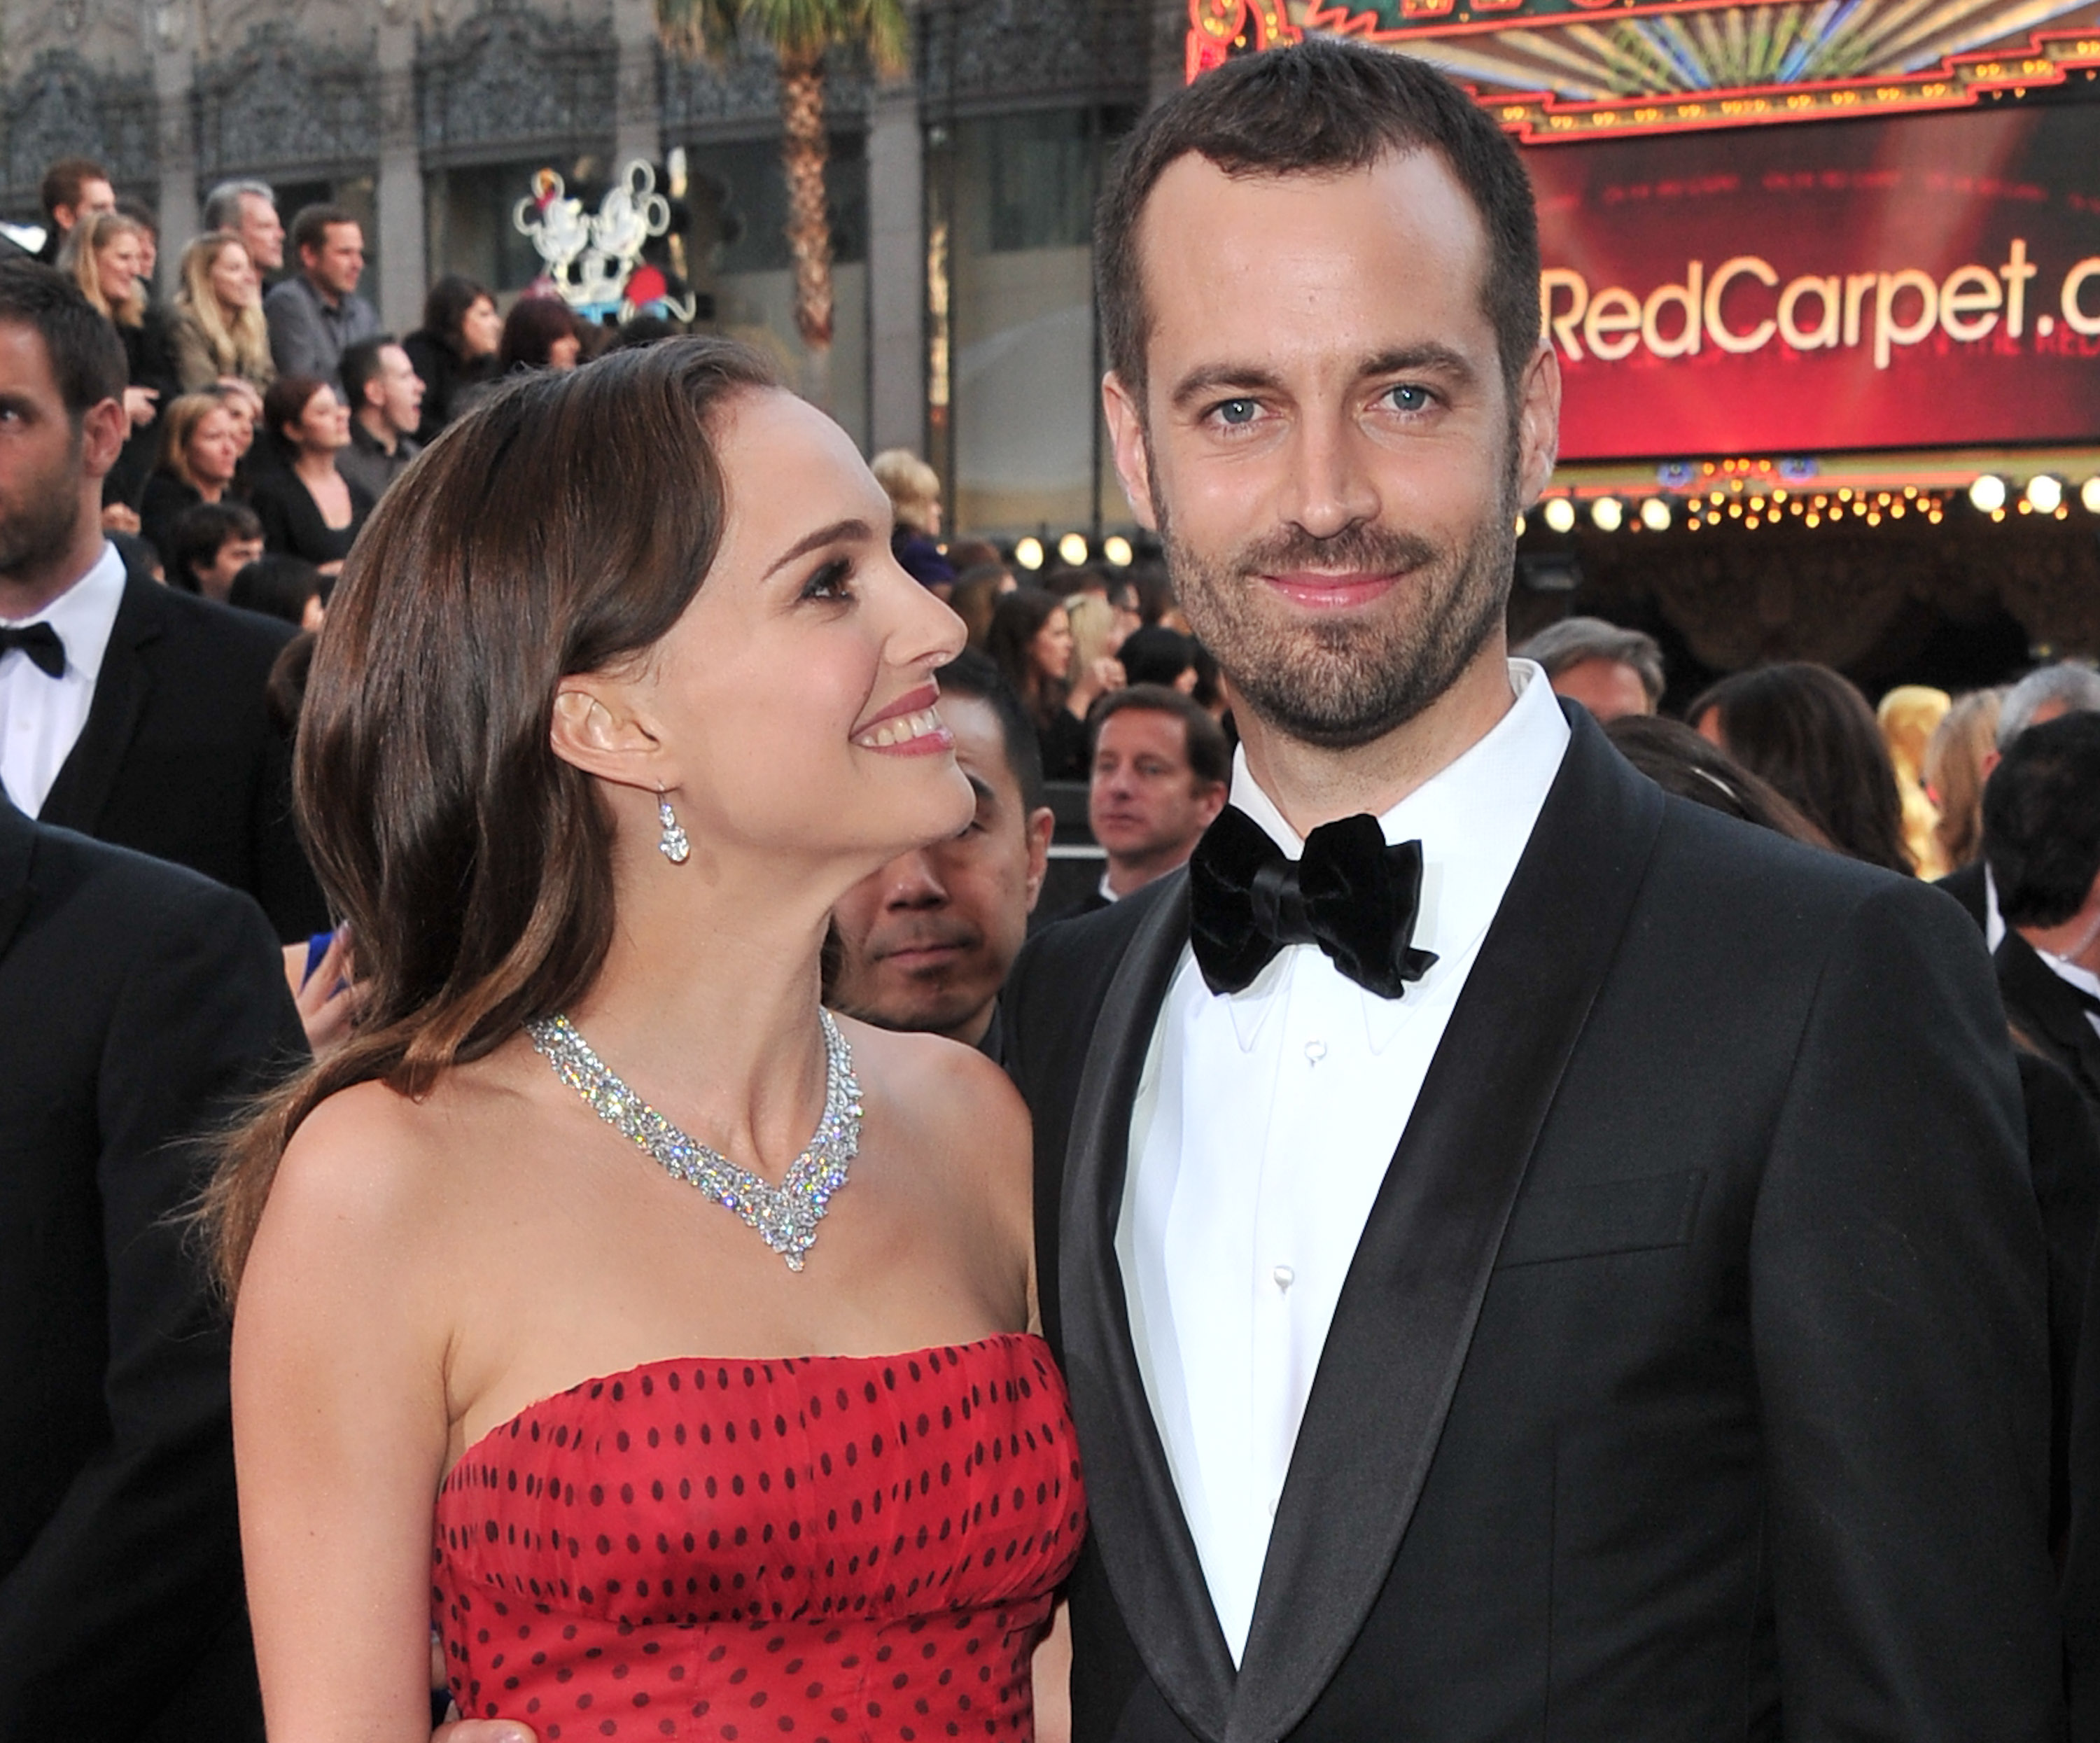 Natalie Portman and Benjamin Millepied at the 84th Annual Academy Awards | Source: Getty Images